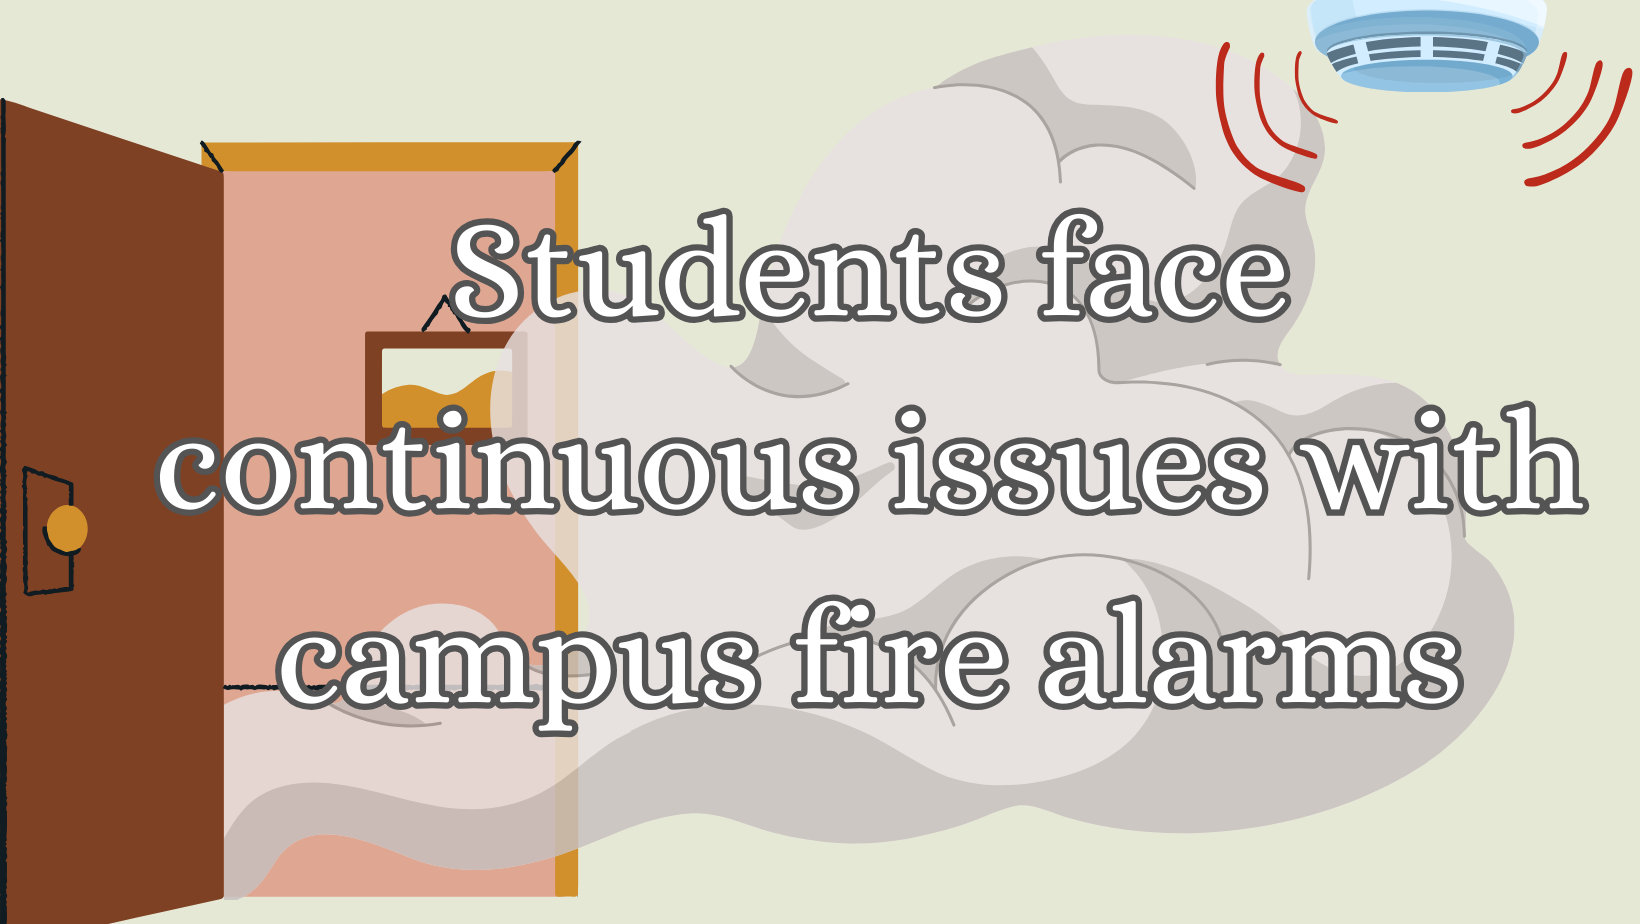 Students express concerns with campus fire alarms.